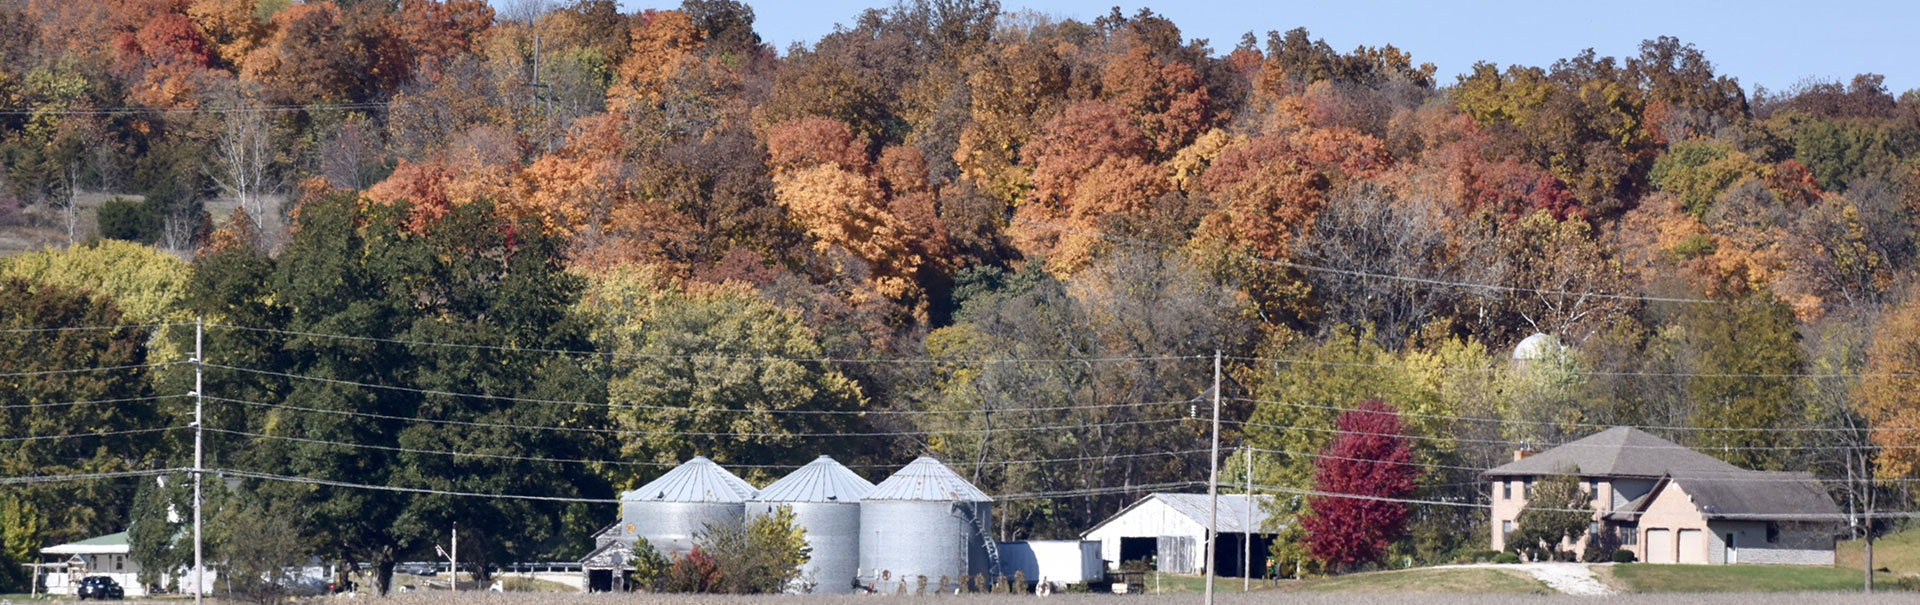 Fall foliage in the hills of Pike County, Illinois